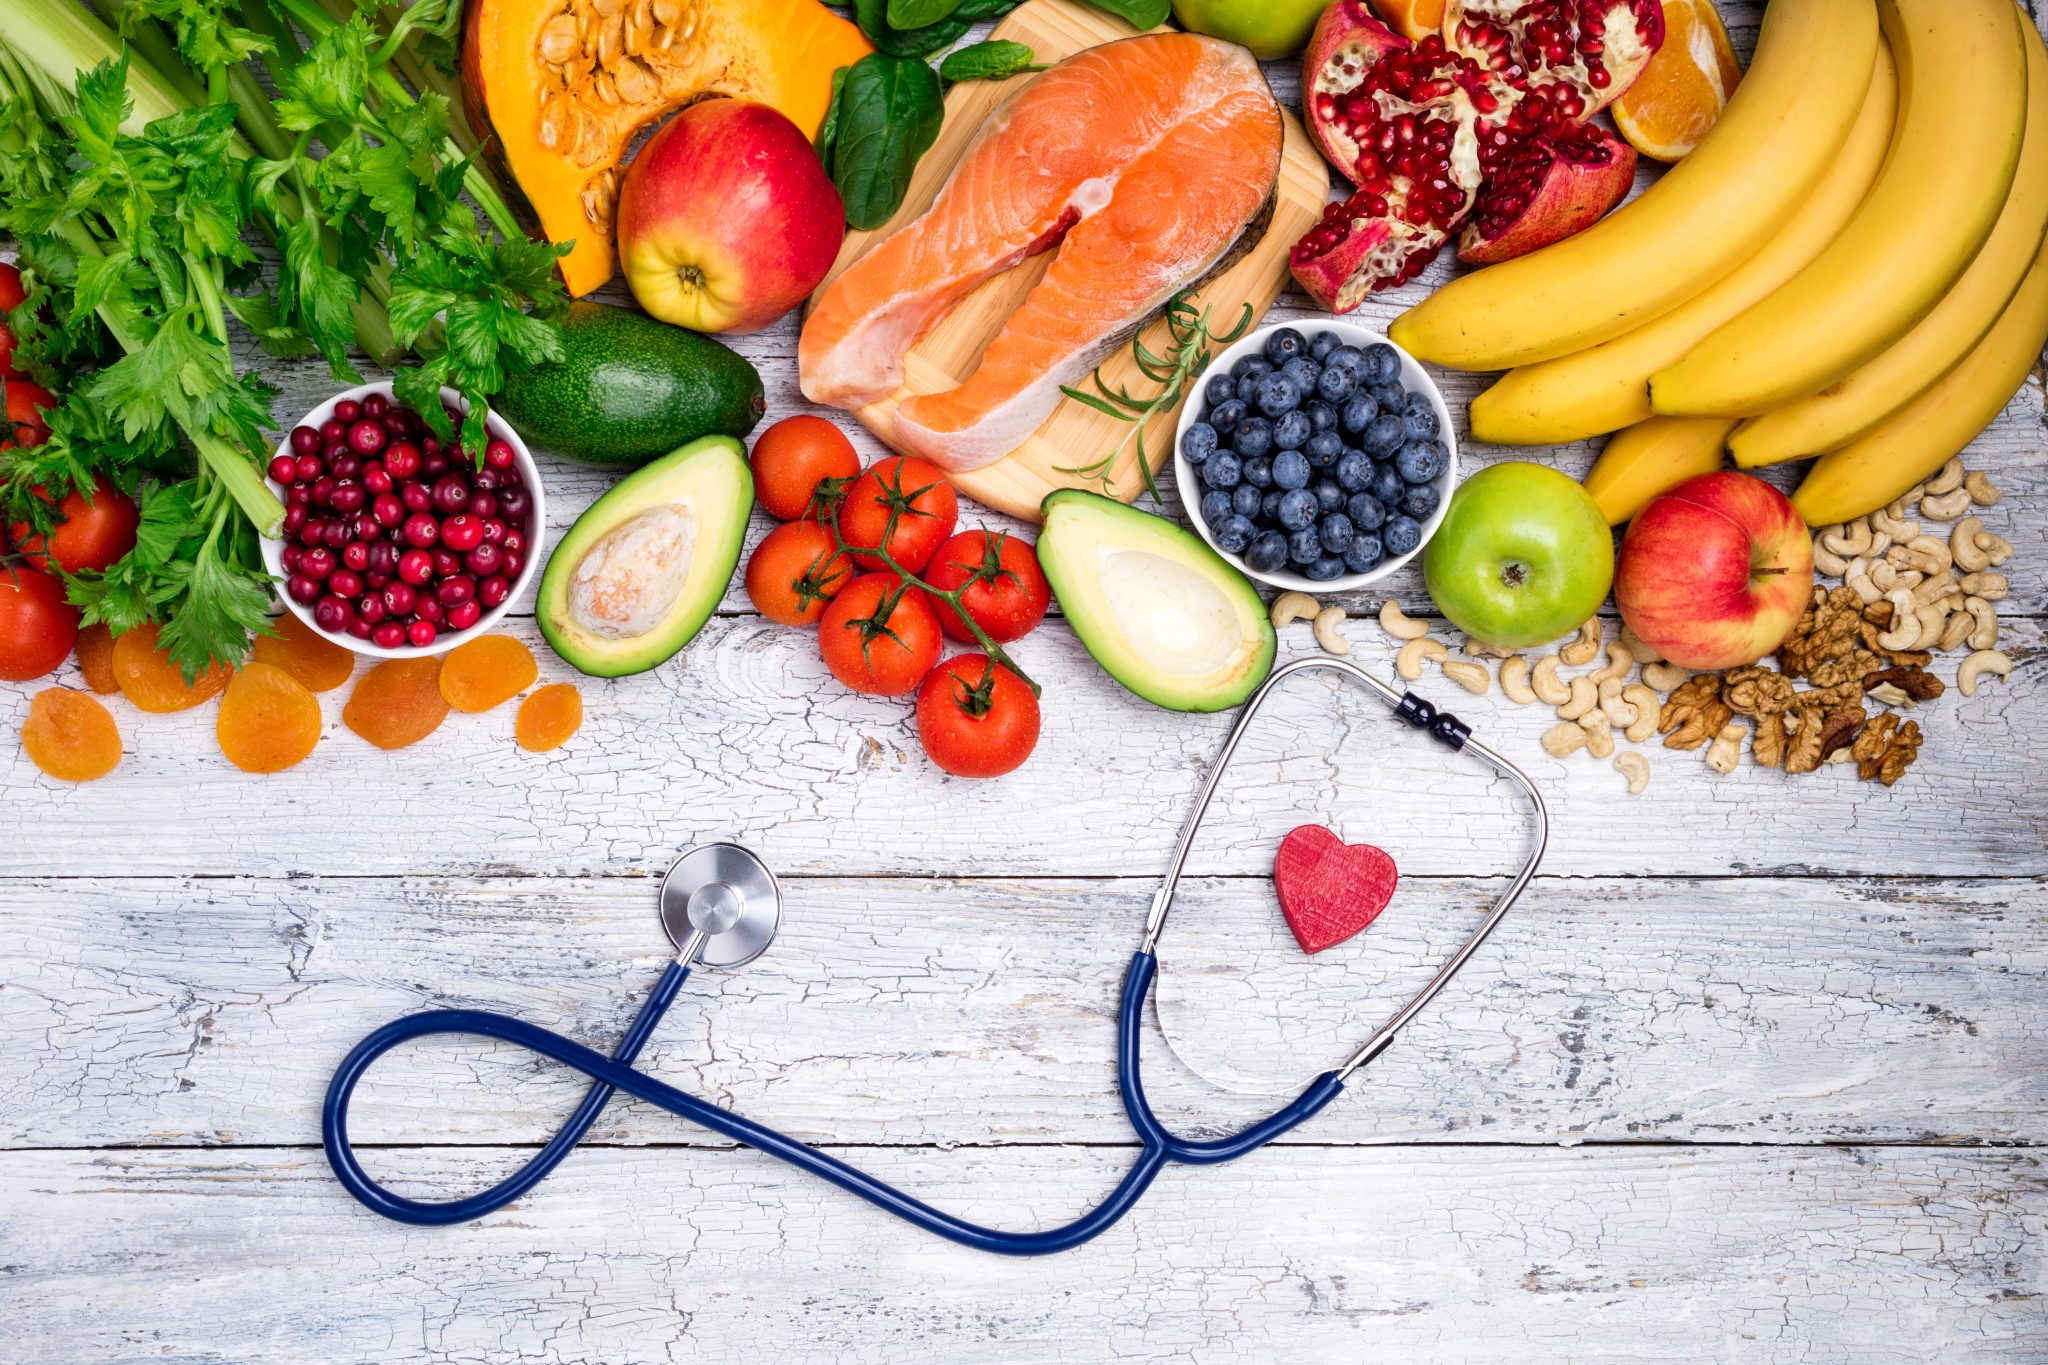 Healthy food for heart. Fresh fish, fruits, vegetables, berries and nuts. Healthy food, diet and healthy body concept.